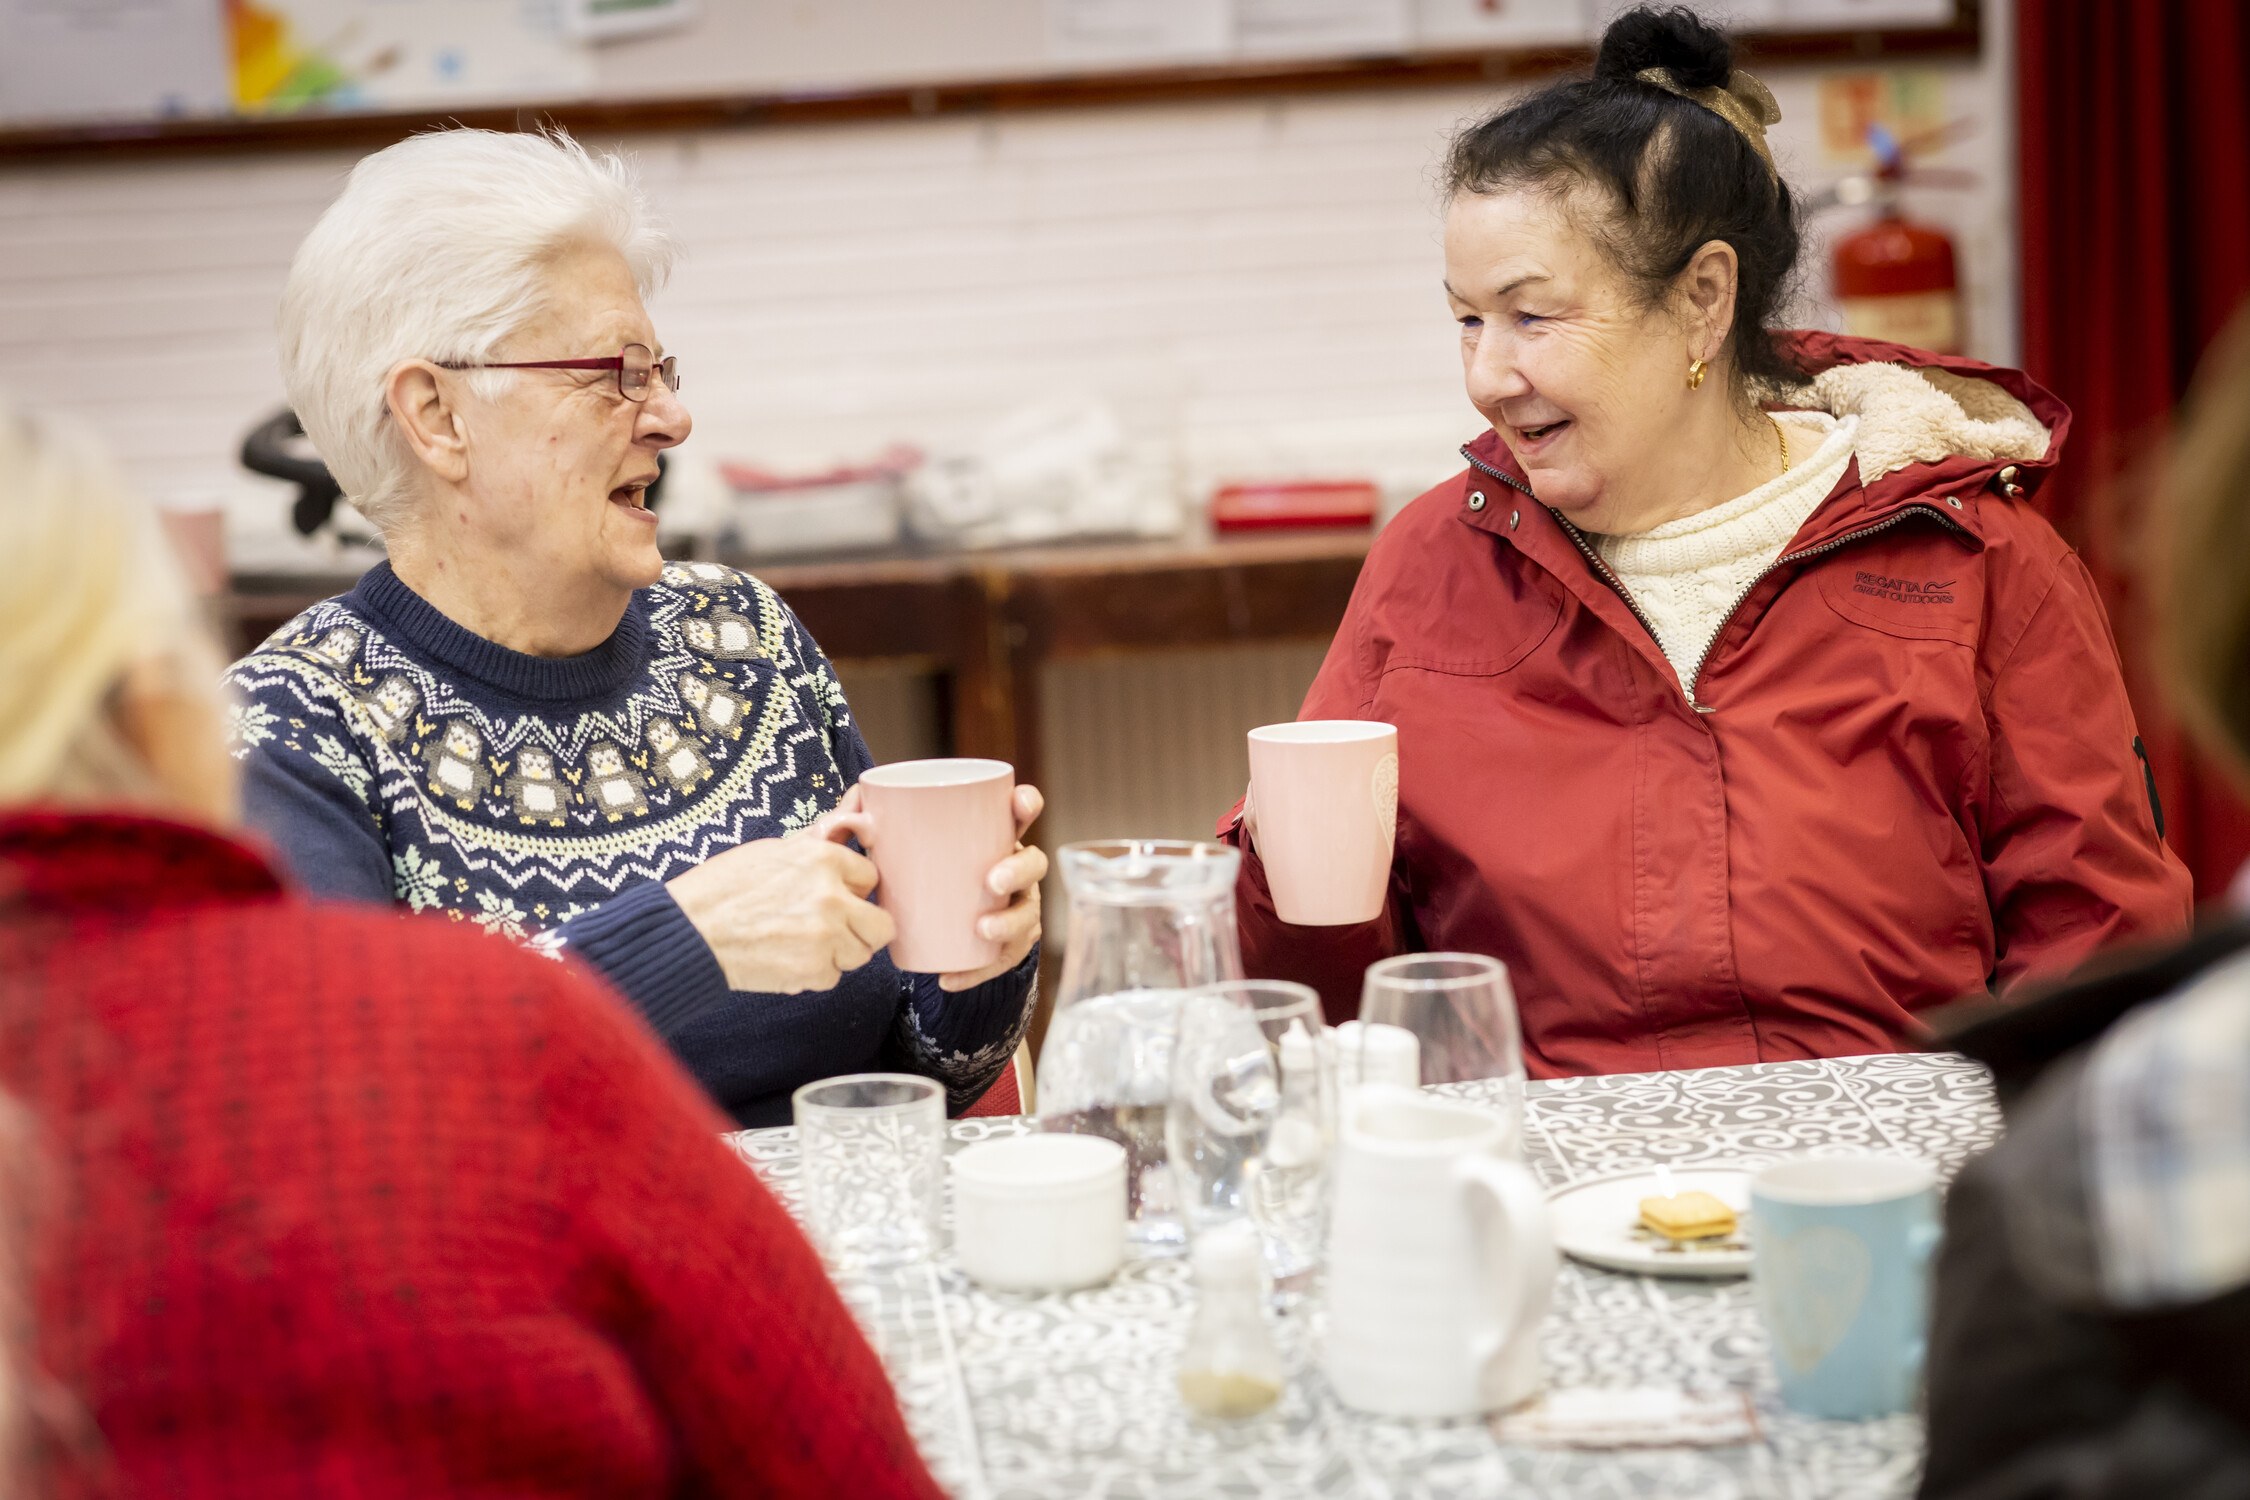 New Adult Social Care Fellowship opportunities launched